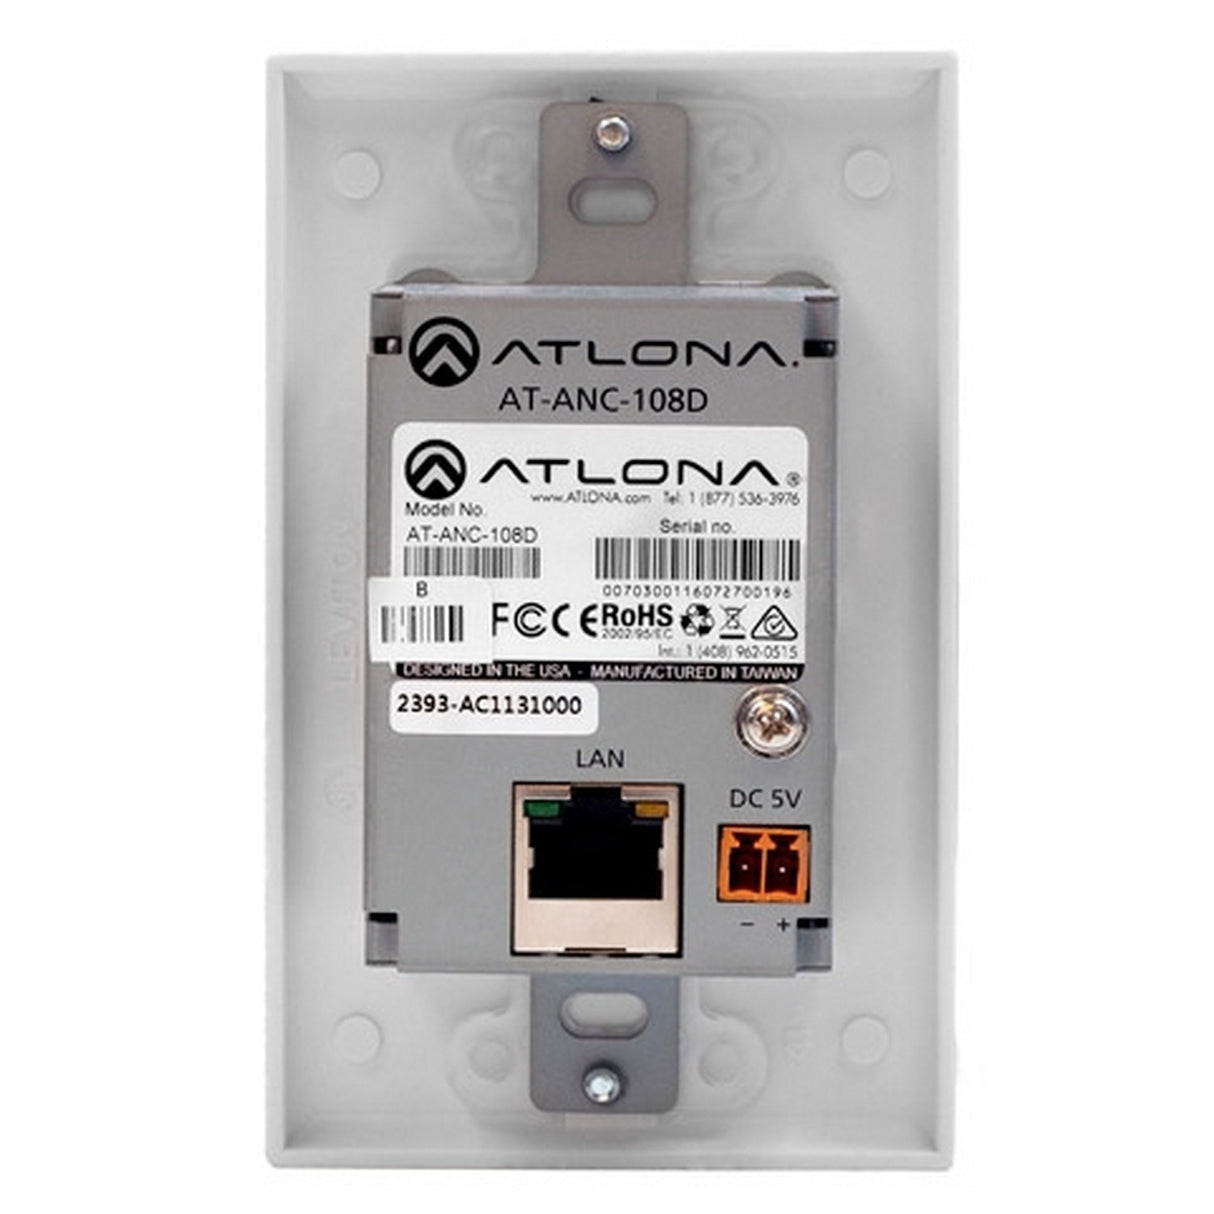 Atlona AT-ANC-108D 8-Button Network Control Panel